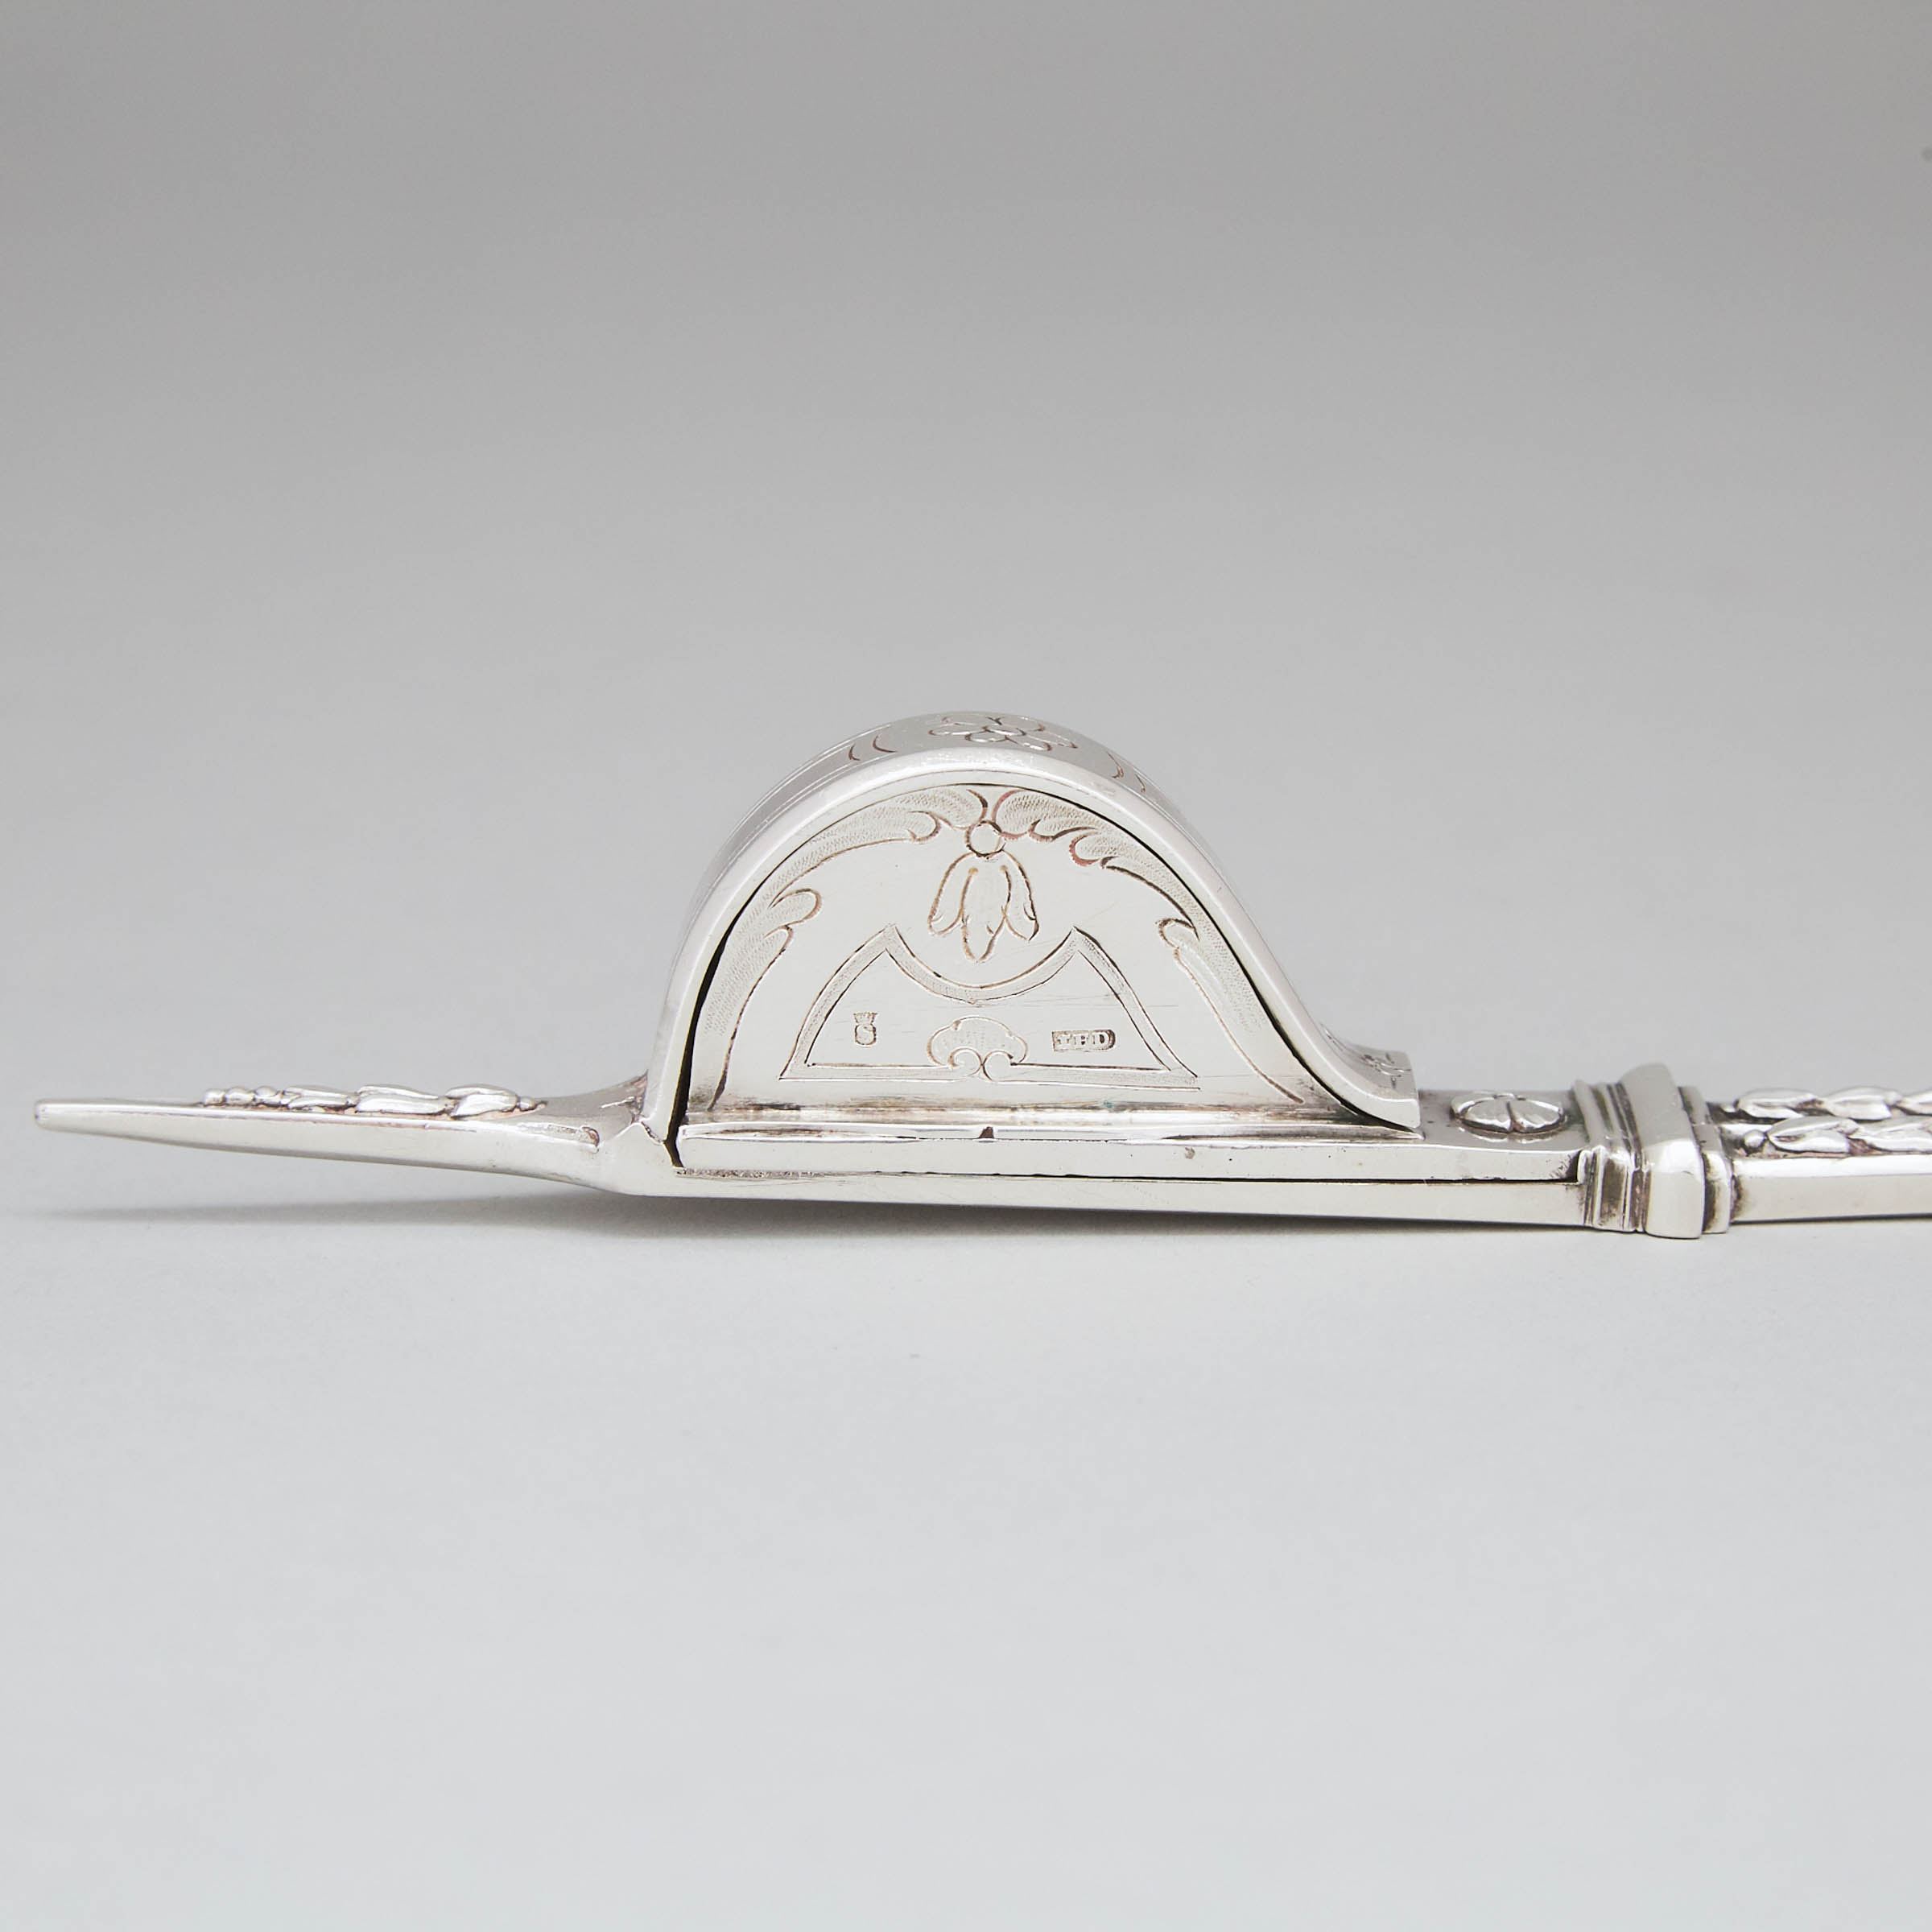 Portuguese Silver Snuffers, possibly Colonial, late 18th/early 19th century